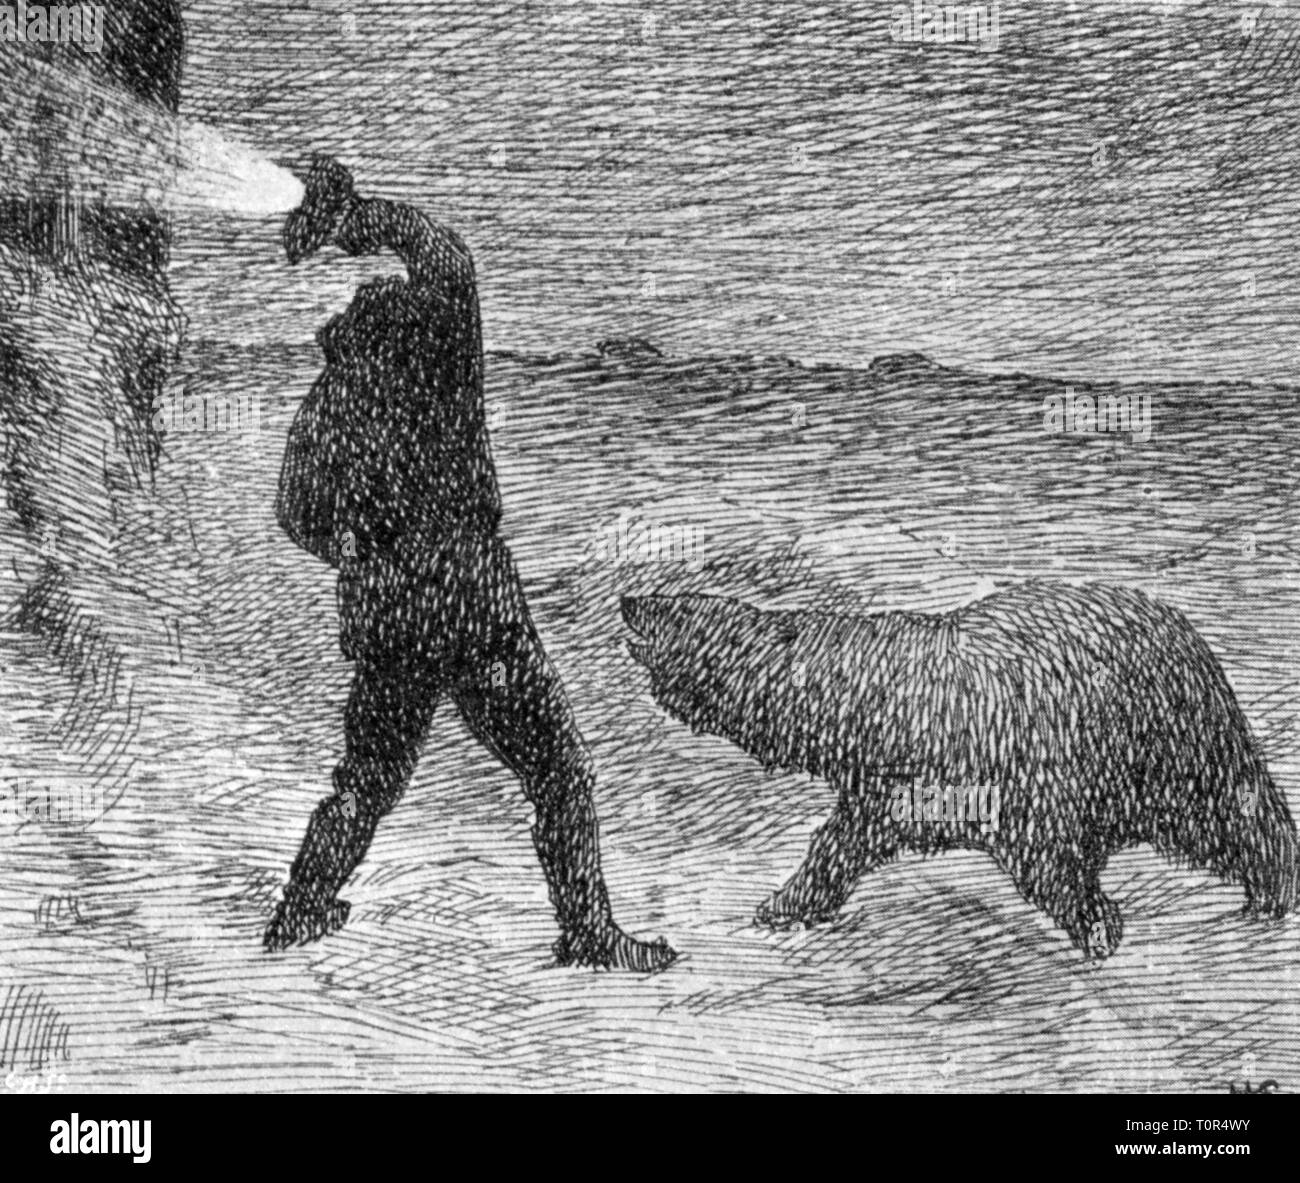 expedition, polar expedition, Fram expedition 1893 - 1896, Peter Henriksen fighting against a polar bear with a lantern, from: Fridtjof Nansen, 'In Nacht und Eis', volume I, Leipzig, 1897, 19th century, expedition report, report, reports, travel, travels, research, discovery, discoveries, participant, participants, member, members, full length, standing, animal, animals, predator, beast of prey, carnivore, predators, beasts of prey, carnivores, fights, fighting, fight, danger, dangers, polar expedition, polar expeditions, lantern, lamp, lanterns,, Additional-Rights-Clearance-Info-Not-Available Stock Photo